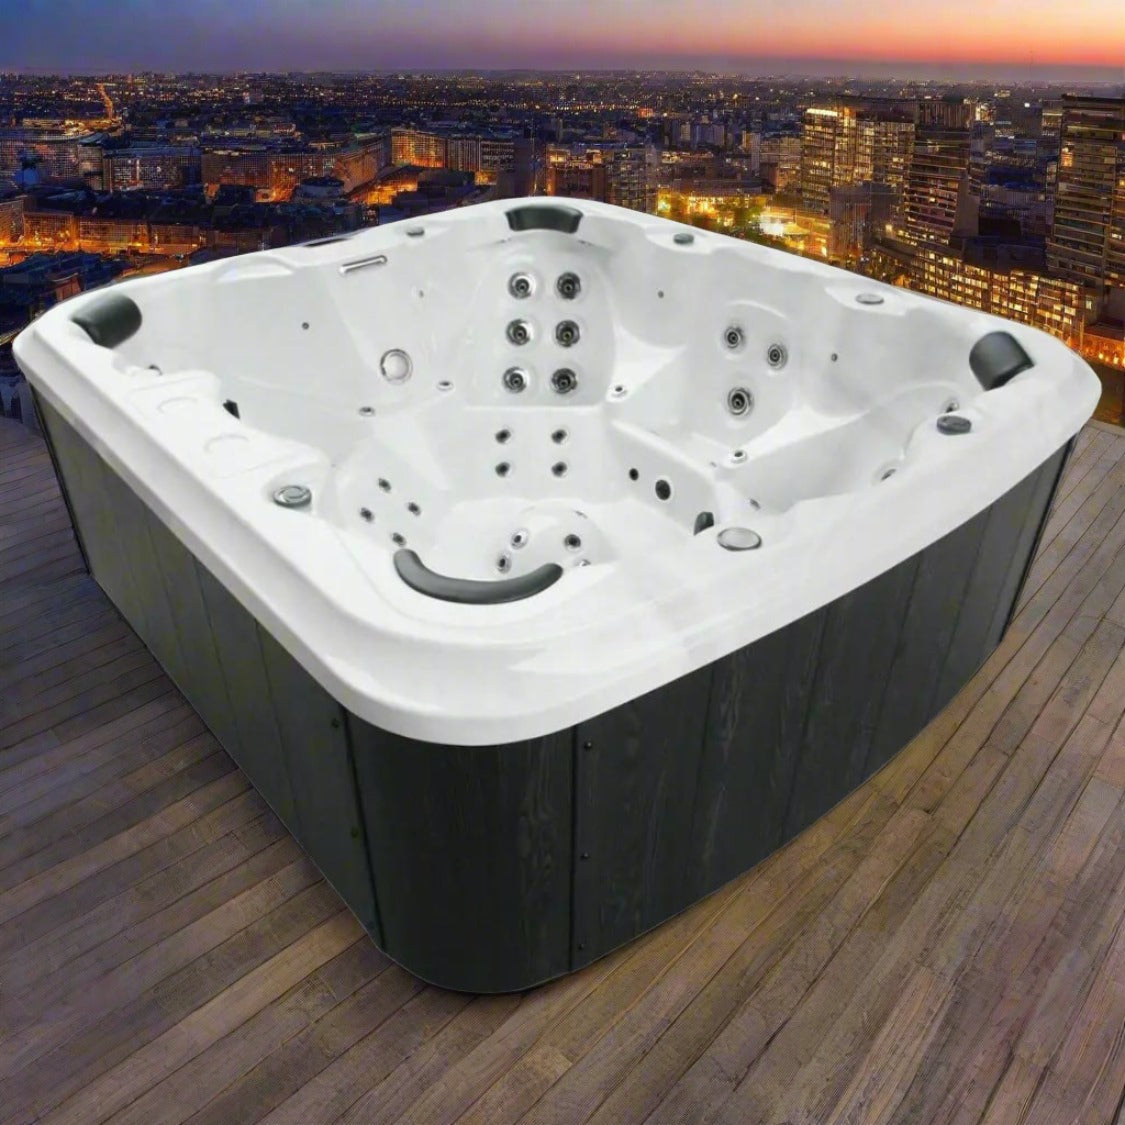 7000 Series hot tub overlooking city